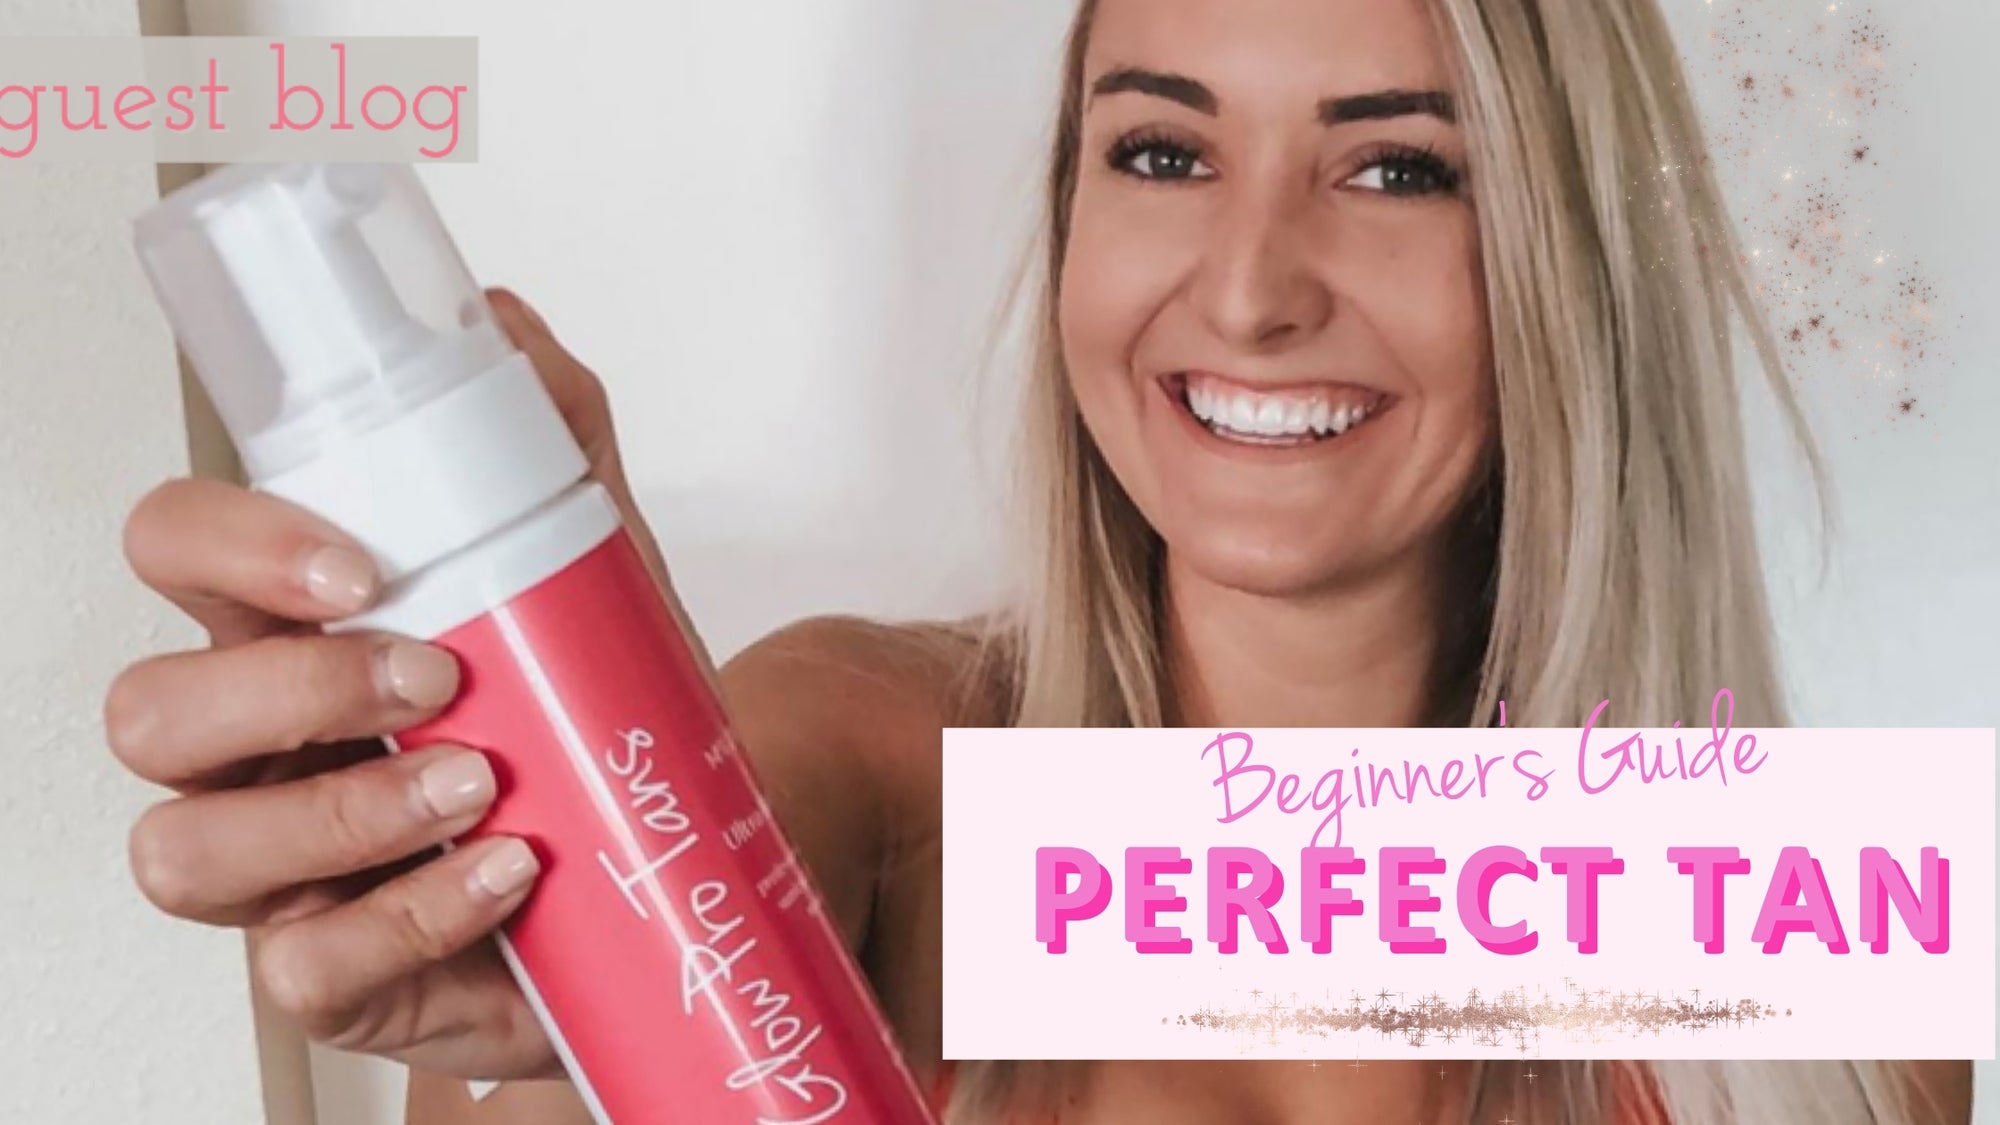 Kristen Freeberg: Beginner's Guide to the Perfect Tan